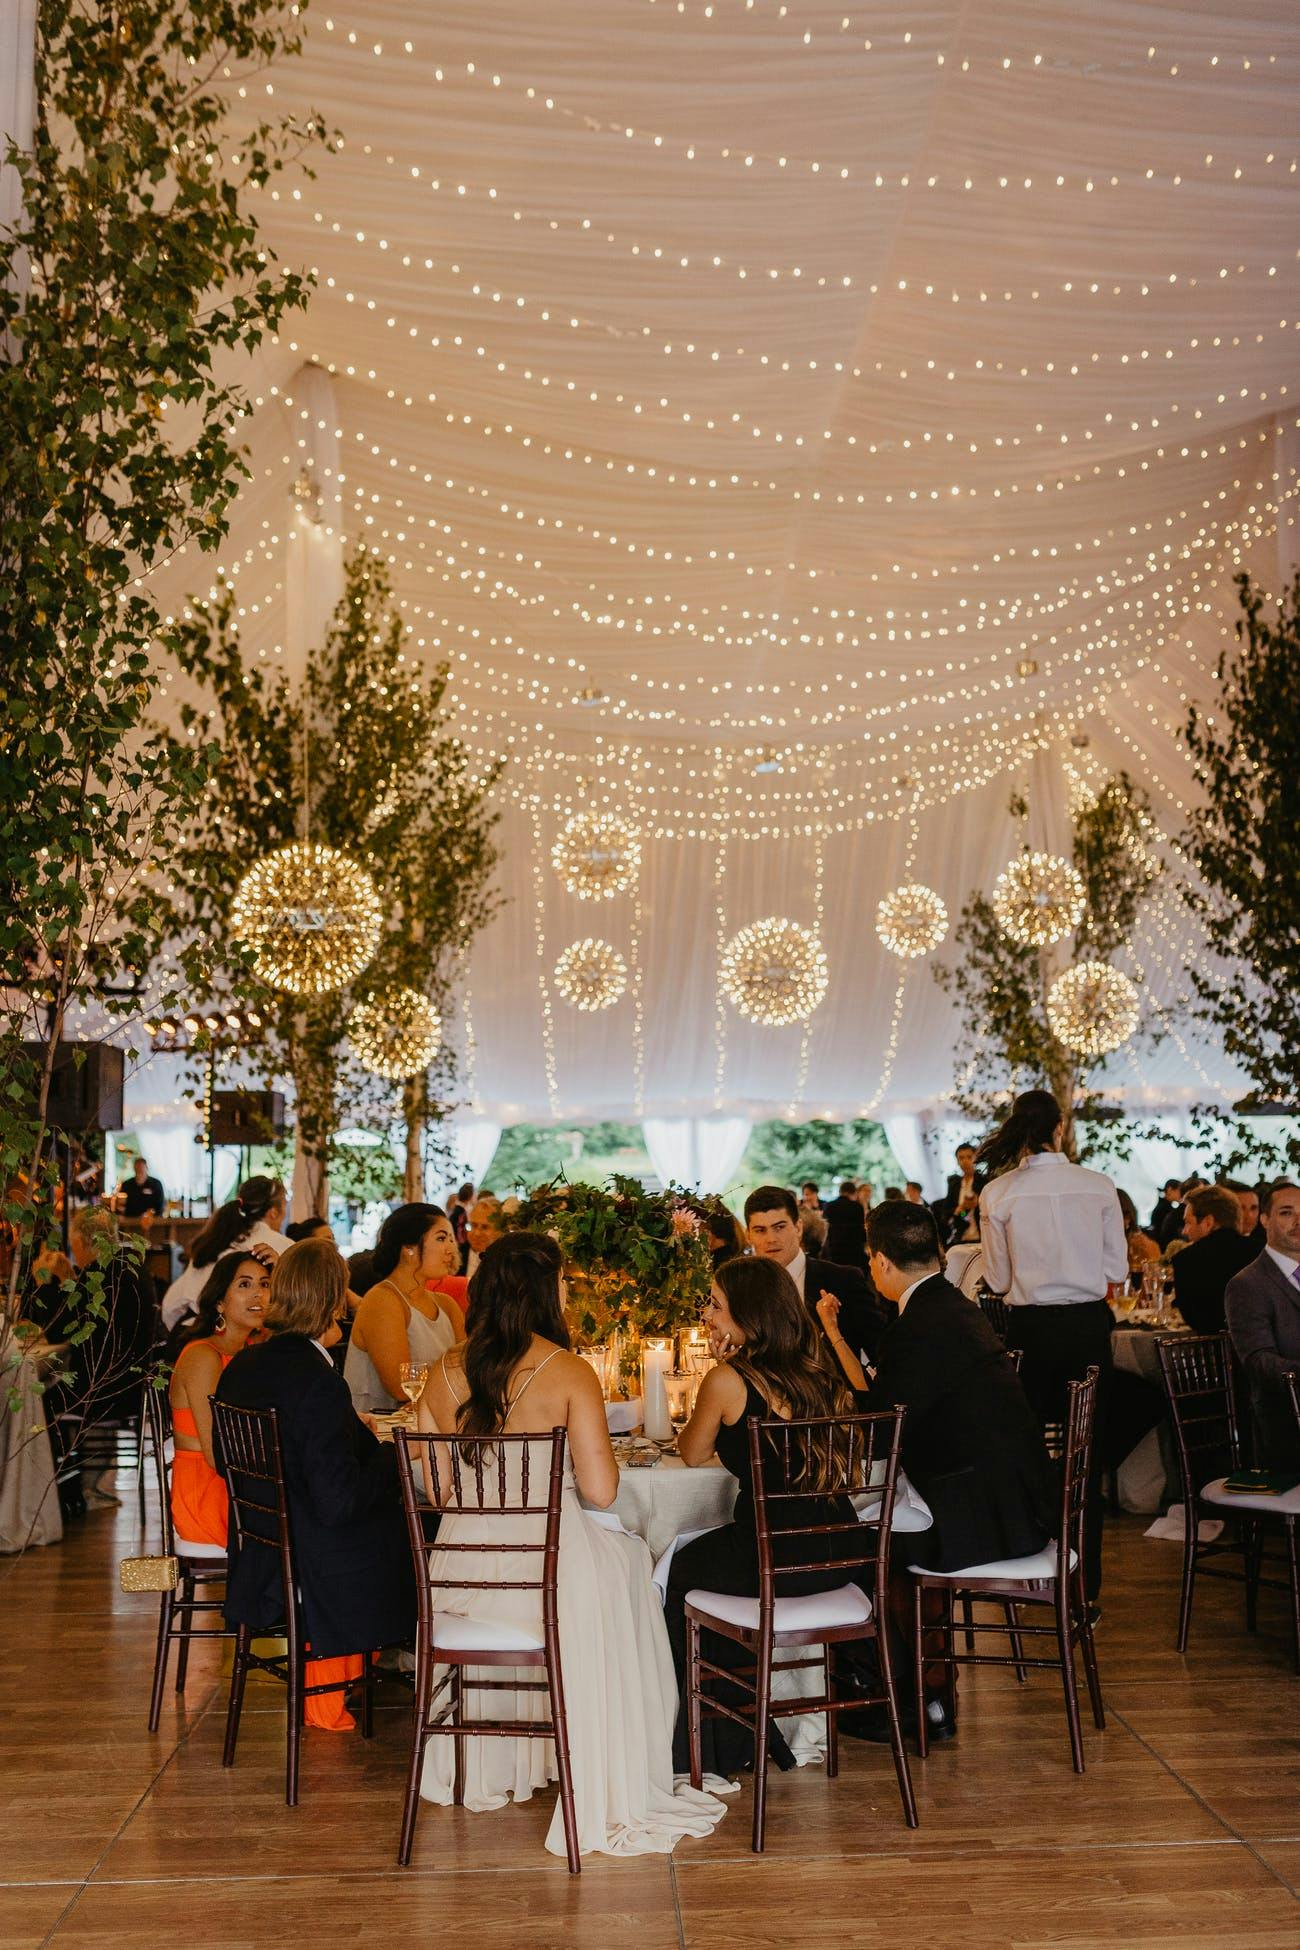 Topnotch Resort Outdoor Wedding Venue with String Lights and White Tent| PartySlate